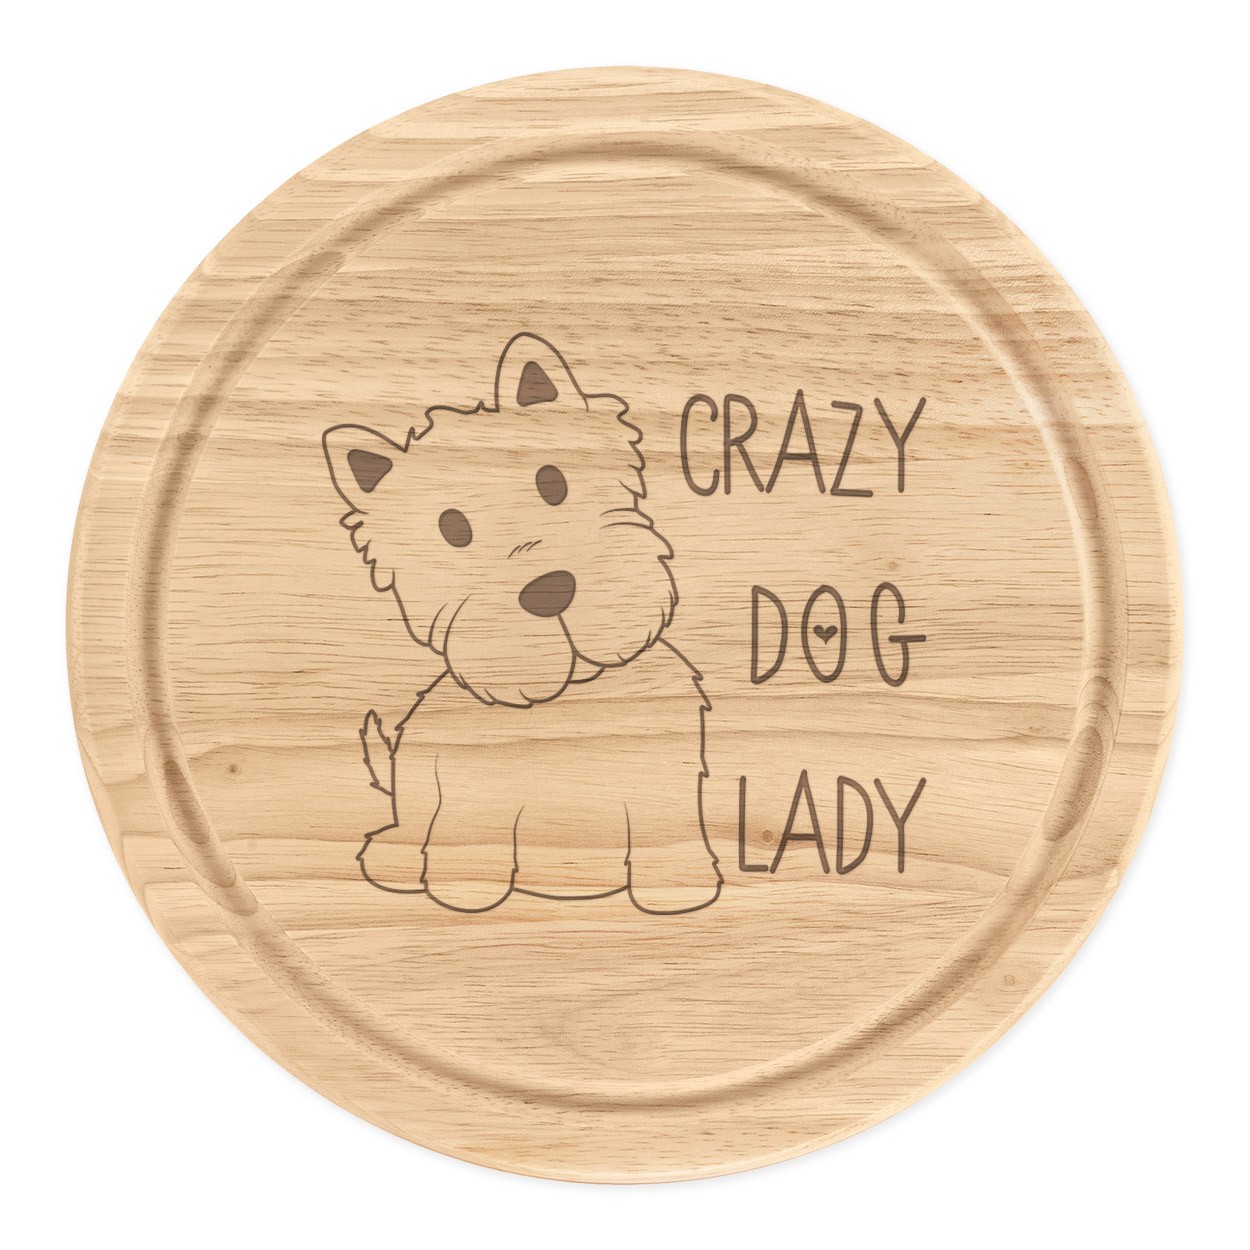 Crazy Dog Lady Wooden Chopping Cheese Board Round 25cm